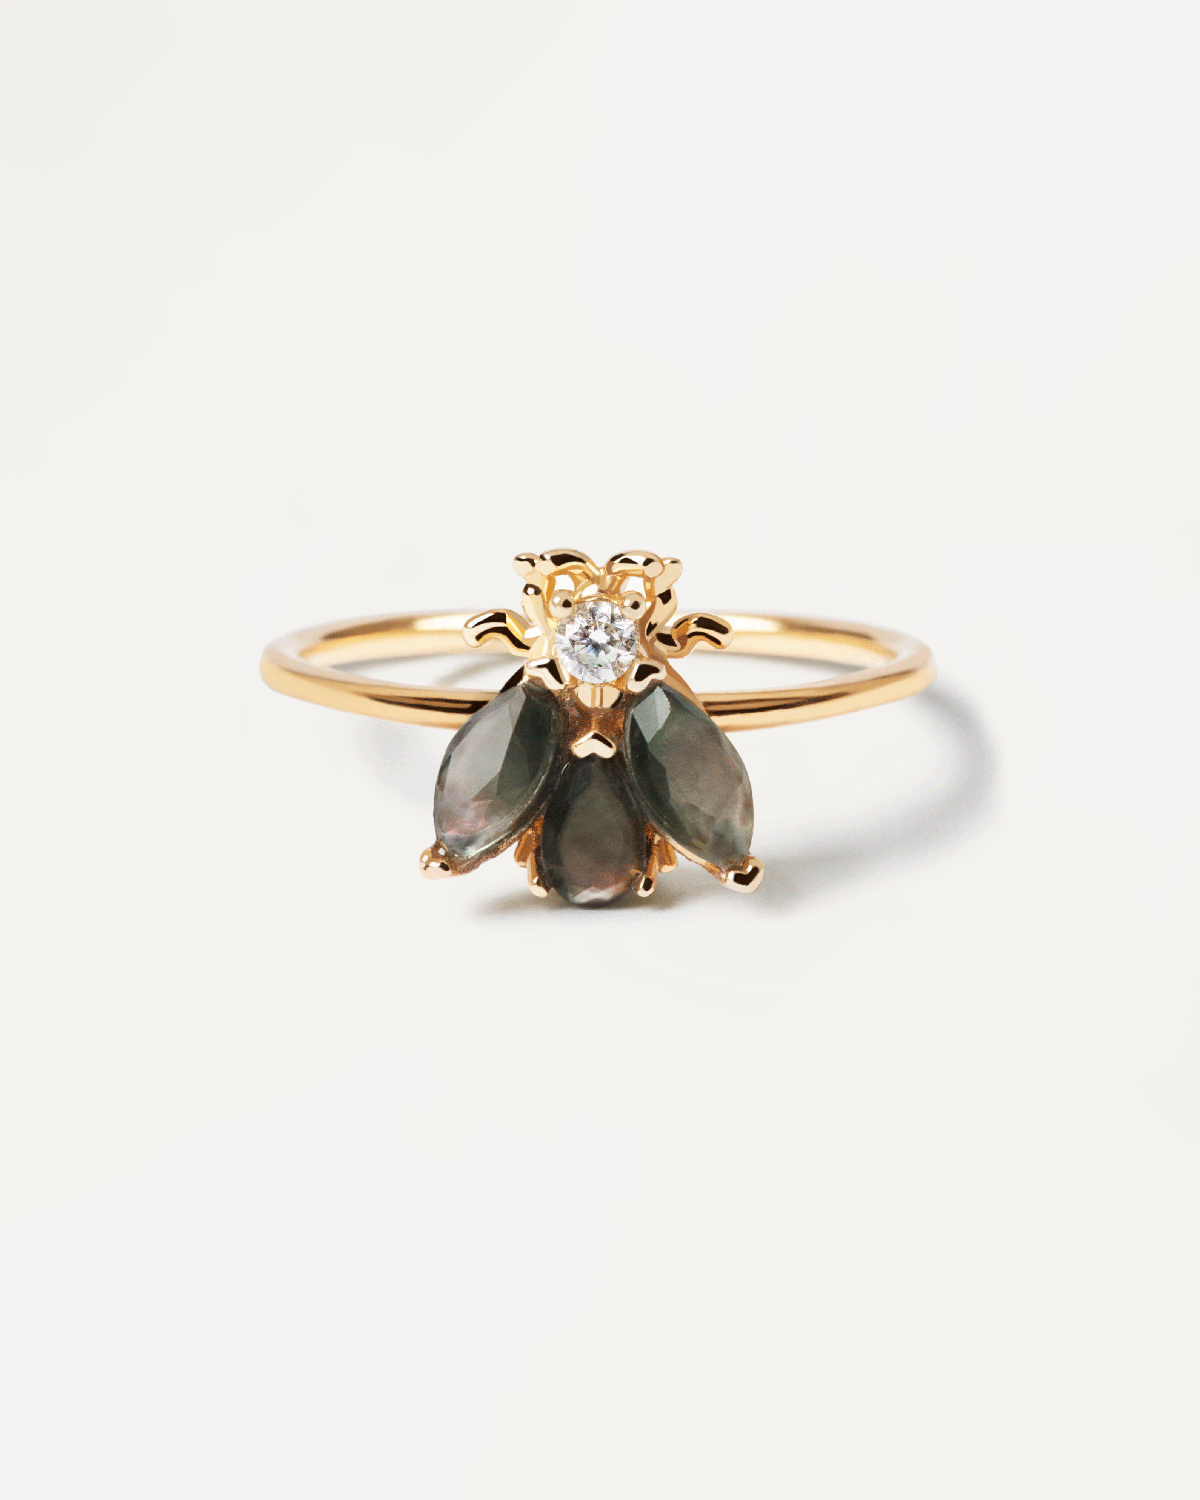 2022 Selection | Zaza Gold Ring. Get the latest arrival from PDPAOLA. Place your order safely and get this Best Seller. Free Shipping over 40€